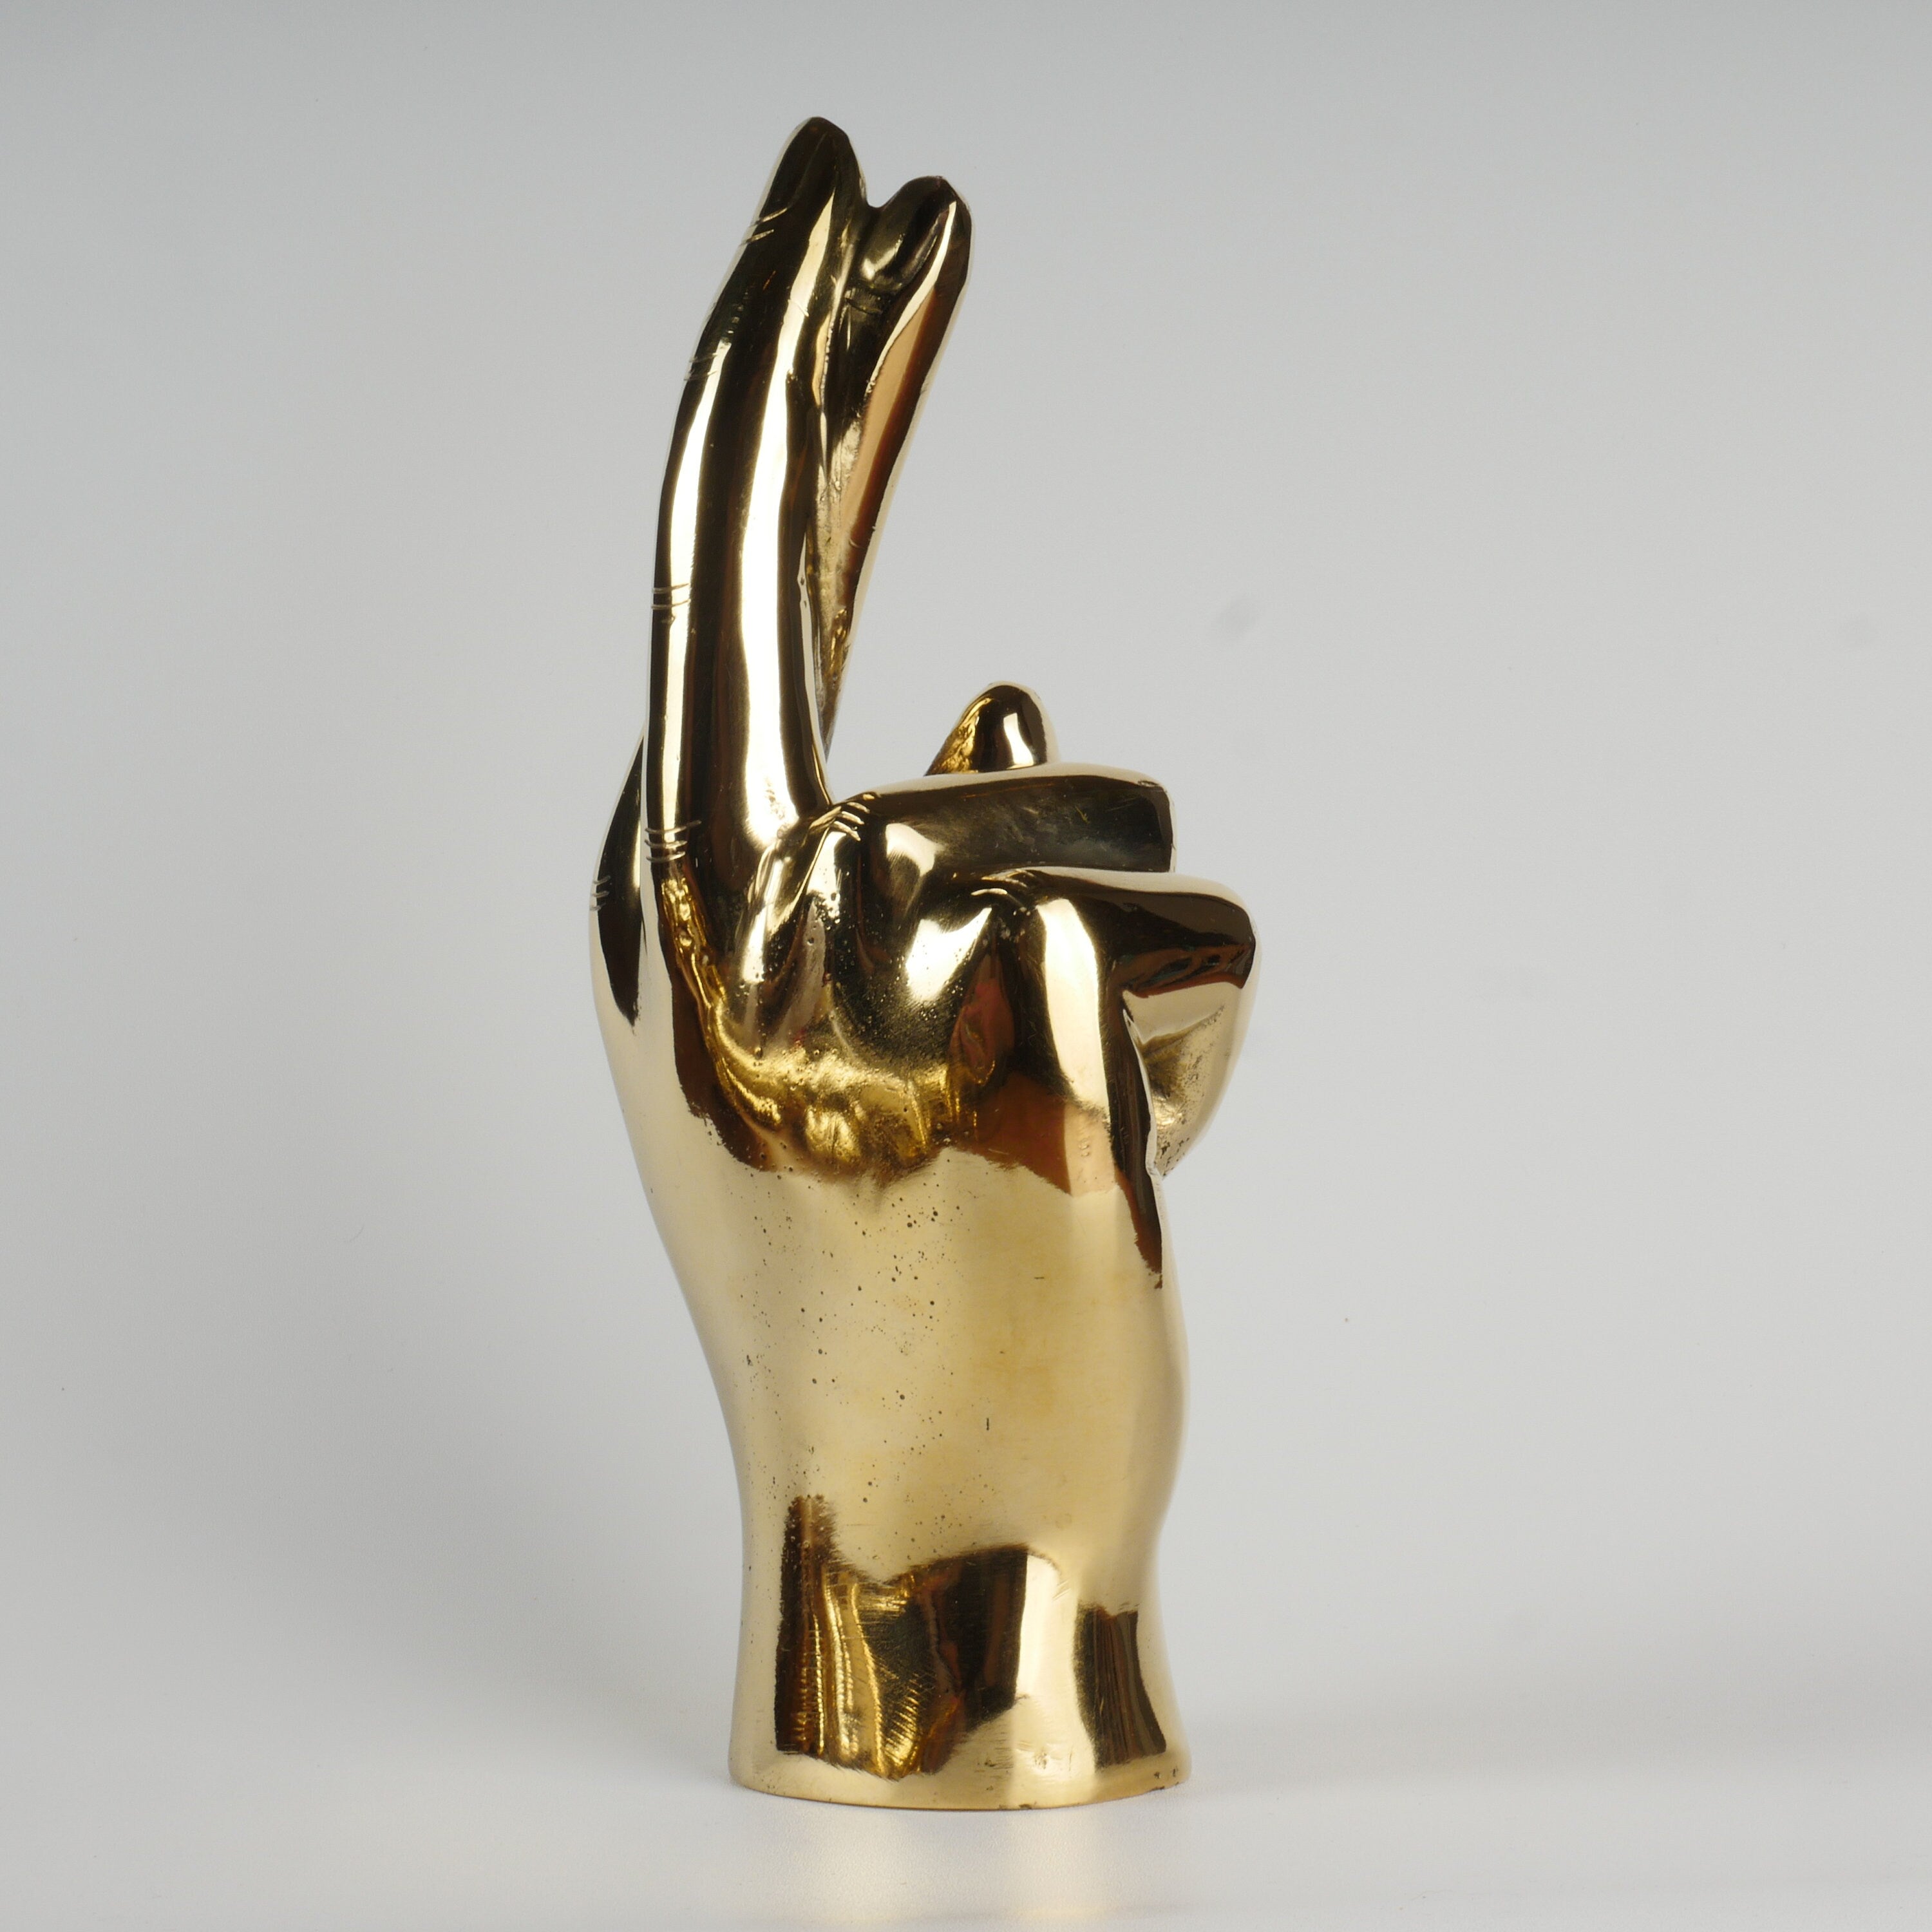 The Crossed Fingers - Promise Hand - Brass Crossed Fingers sign Sculpture - Brass Hand Sign - Brass Hand Signal - Brass Crossed Fingers